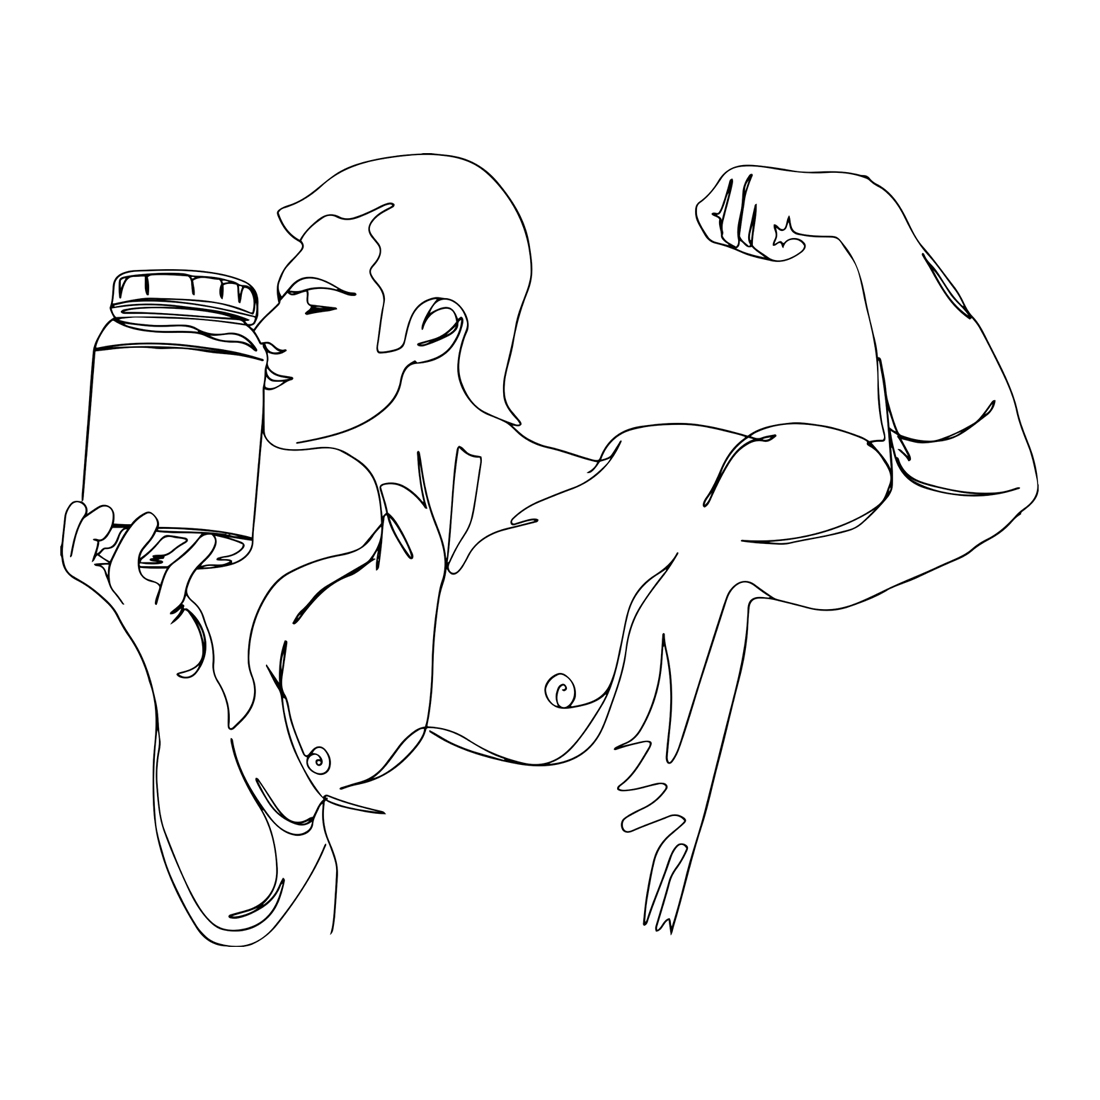 Fitness Romance: Cartoon Sketch of Muscular Man's Affectionate Kiss to Protein Jar, Love for Fitness Fuel: Sketch Drawing of Muscular Man Kissing Protein Powder Jar, Fit man vector preview image.